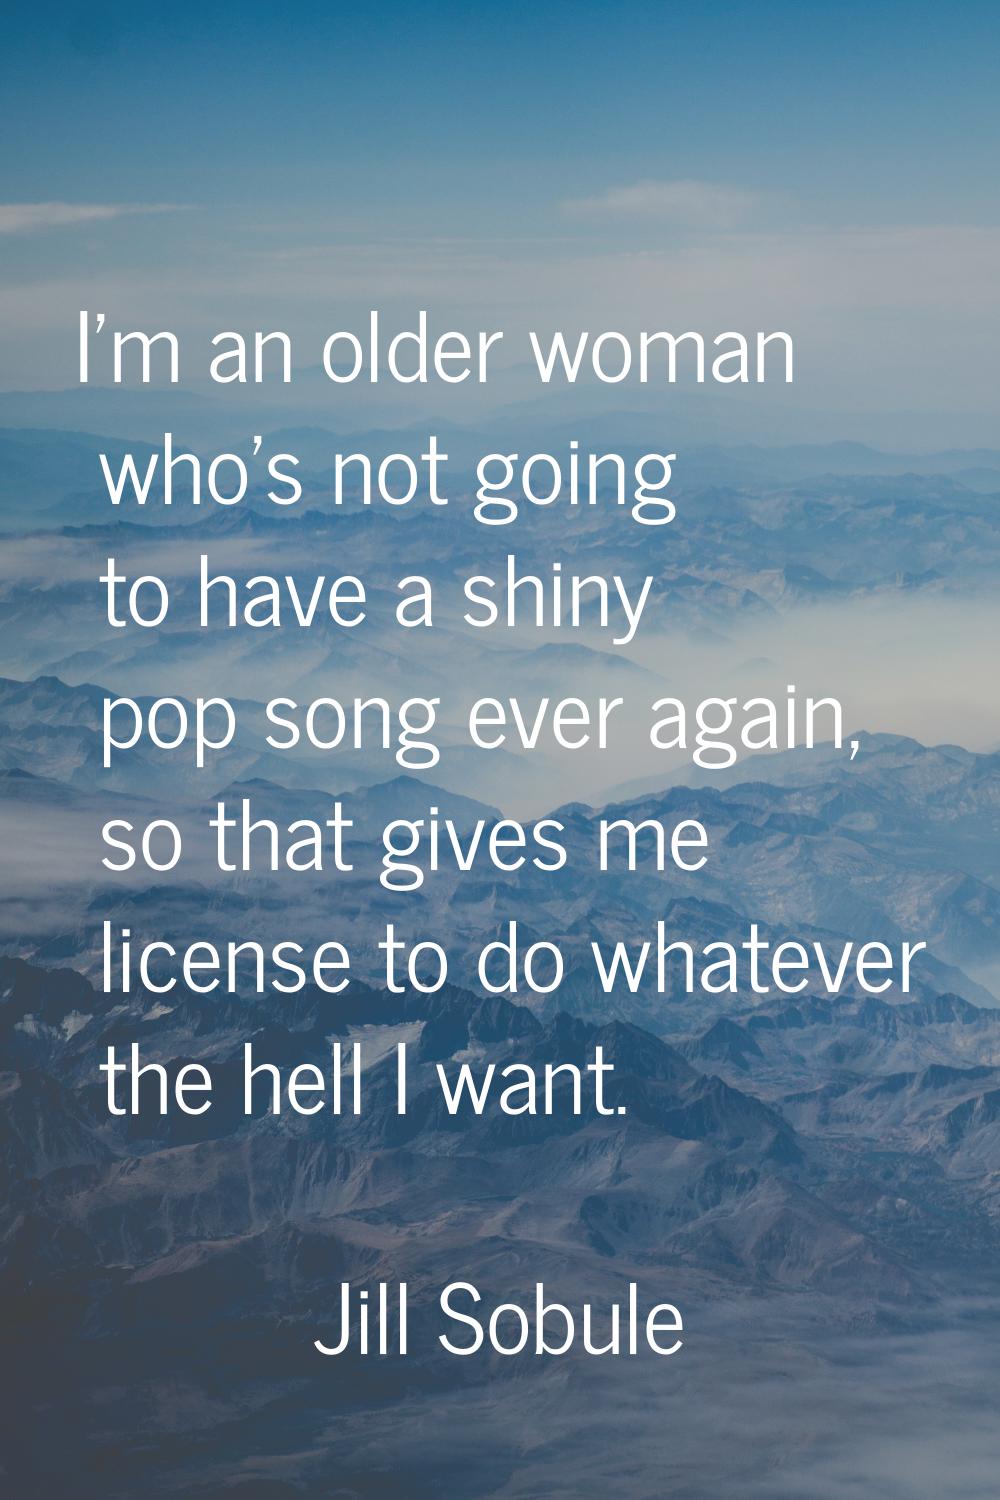 I'm an older woman who's not going to have a shiny pop song ever again, so that gives me license to